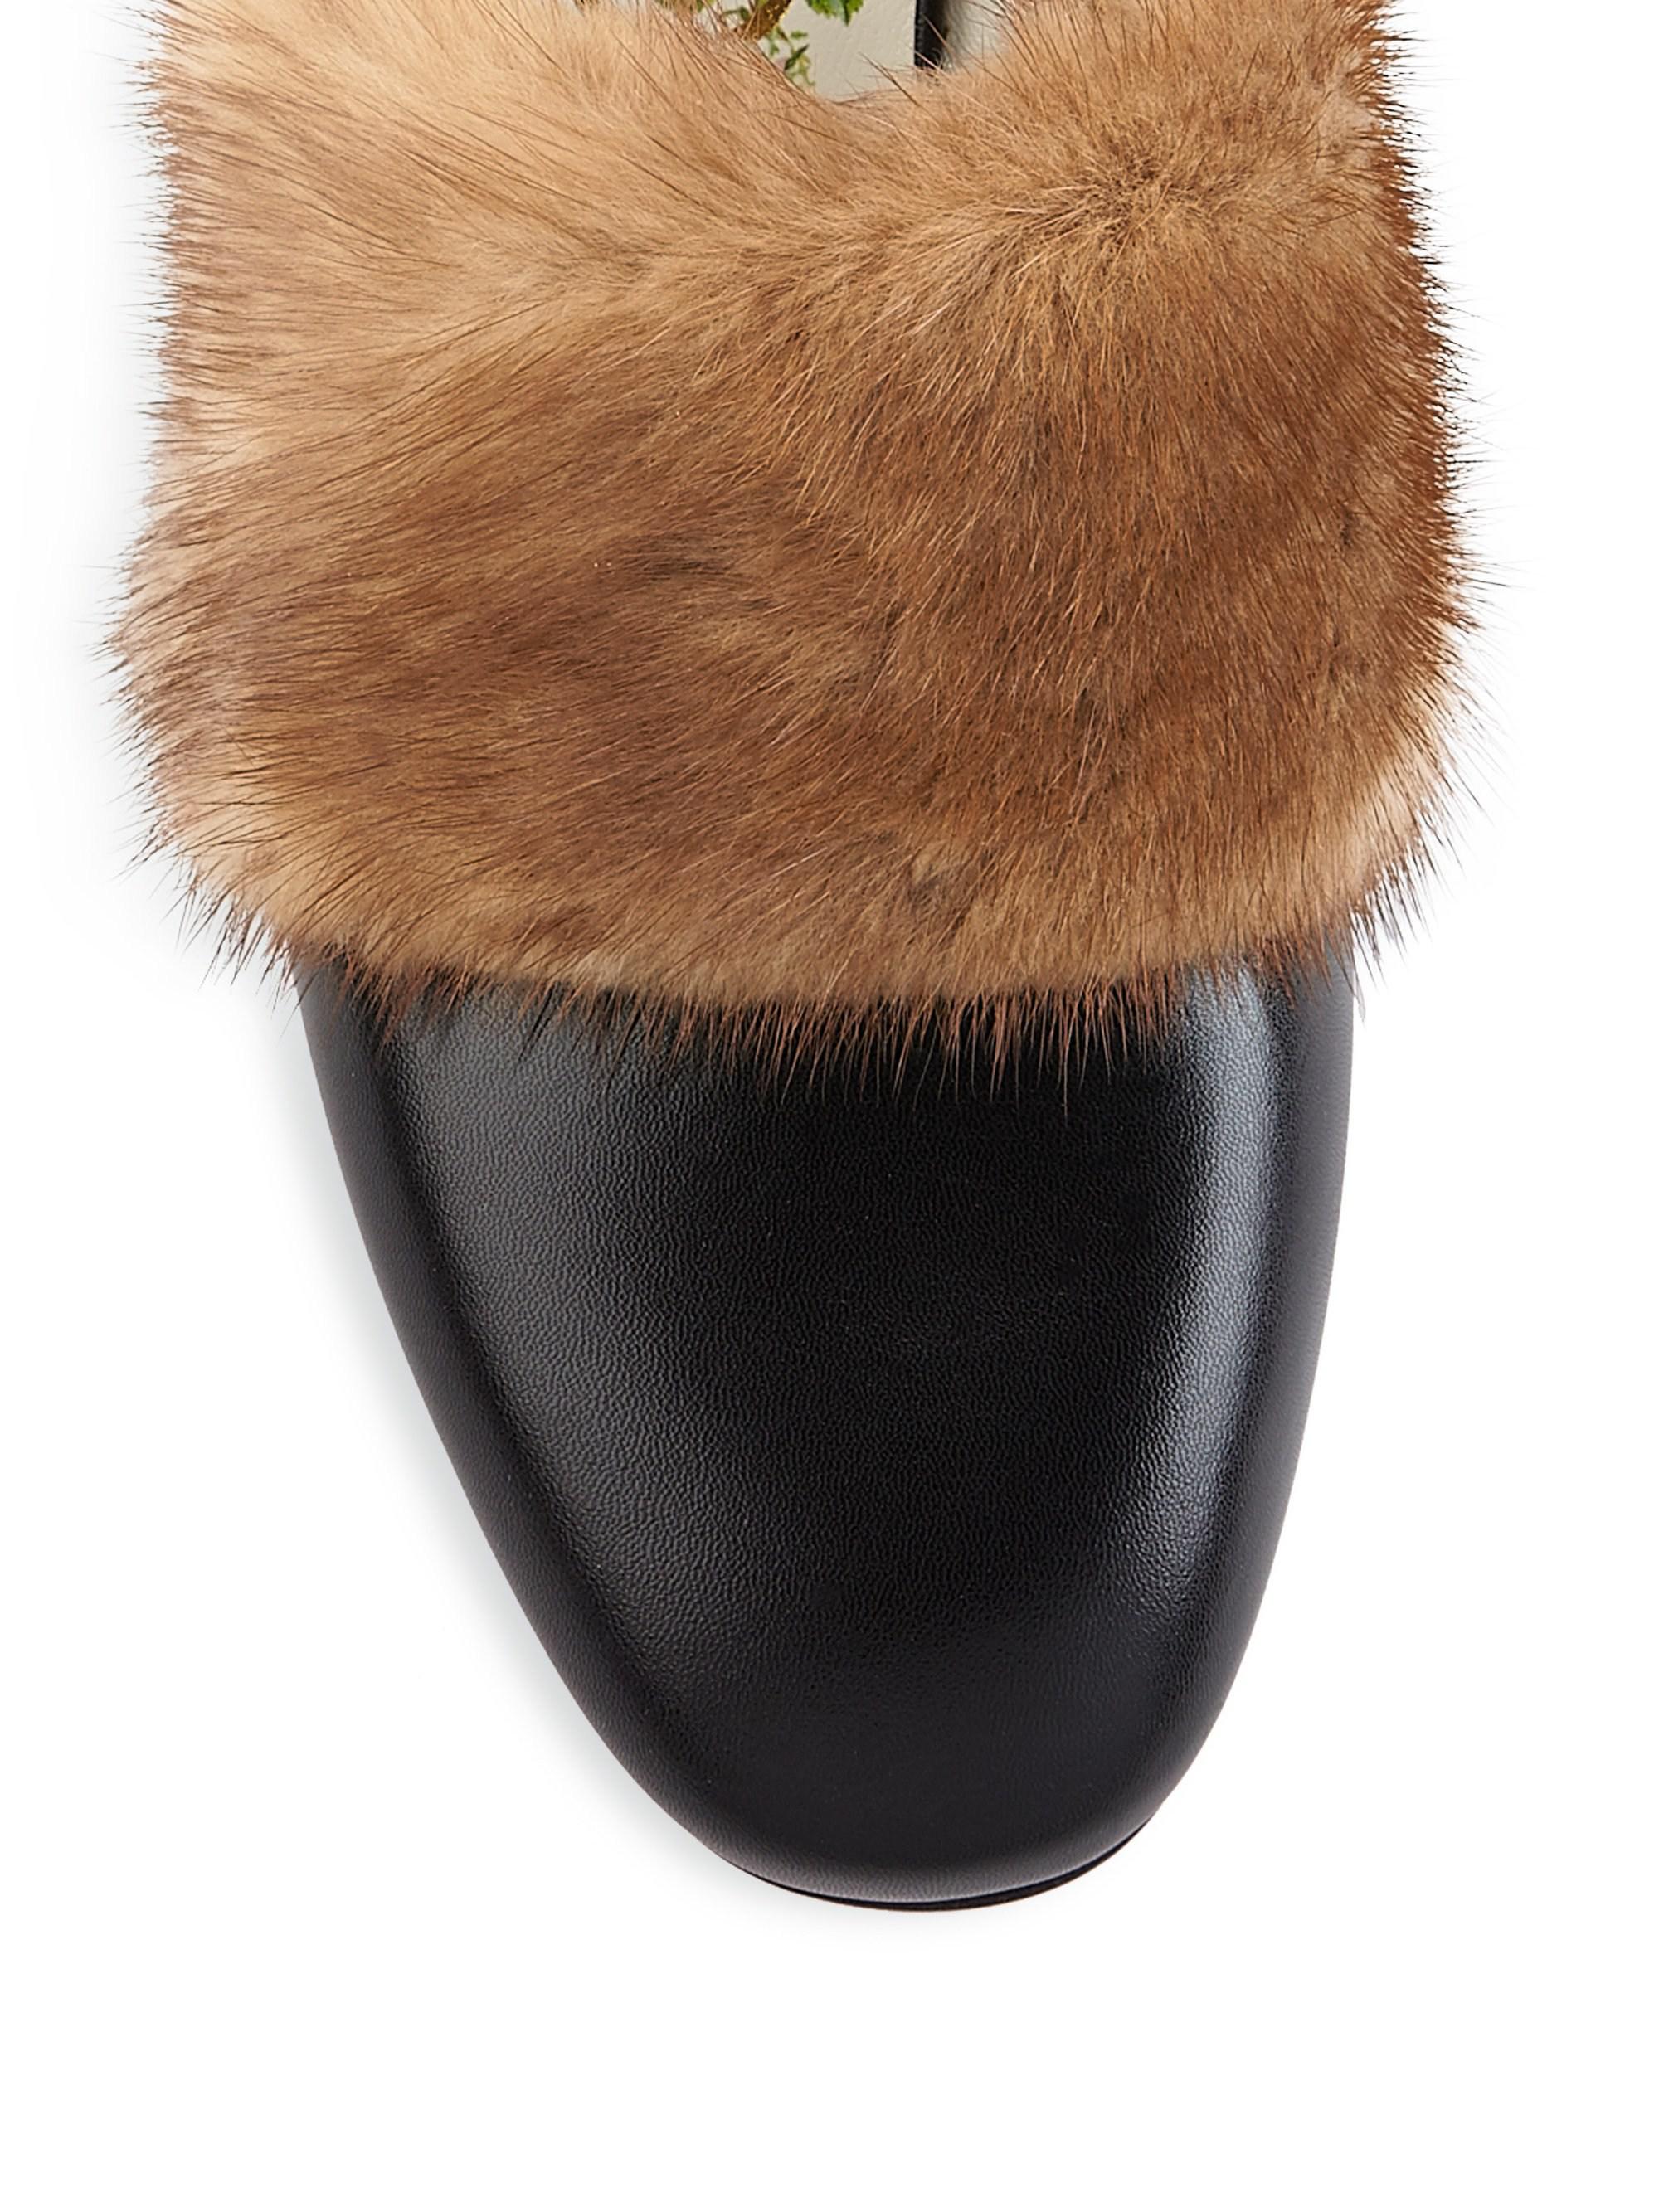 Gucci Leather Slide With Mink Fur in Black - Lyst